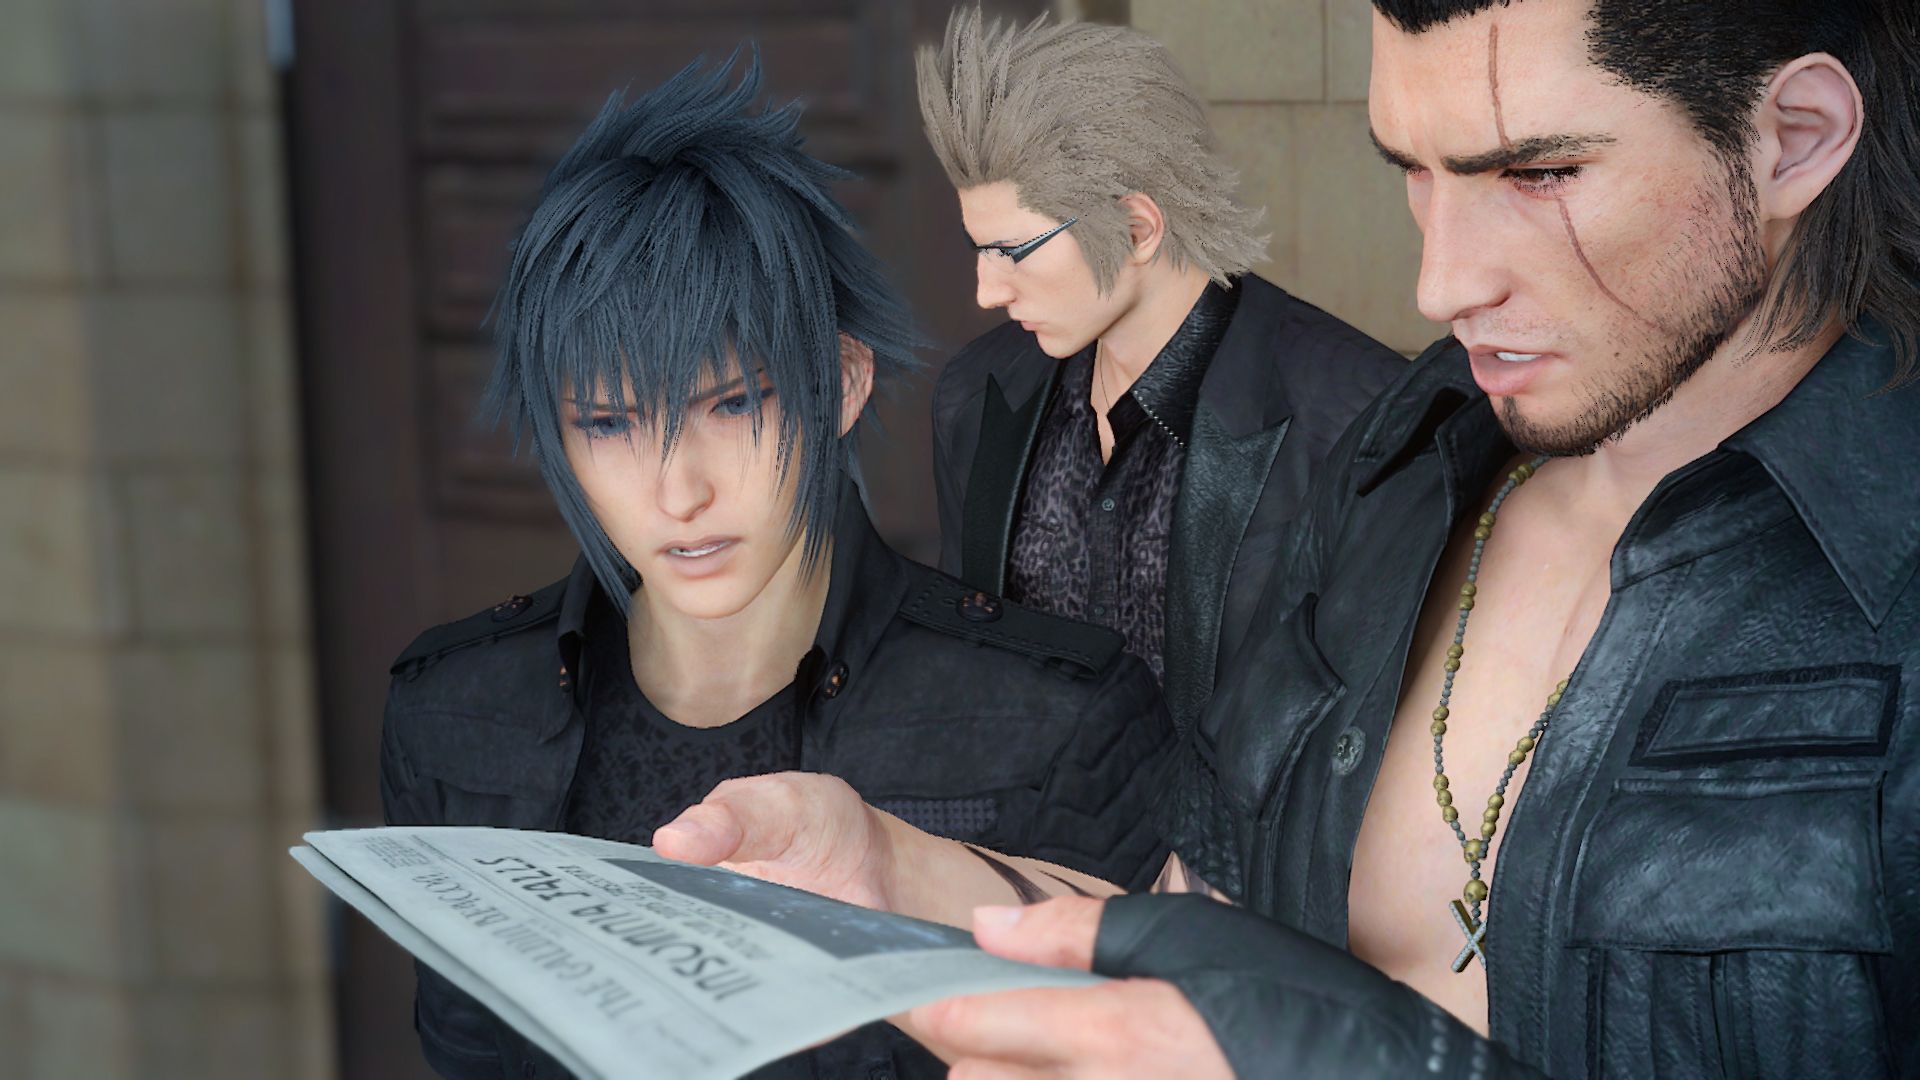 What's inside the $270 Final Fantasy 15 special edition